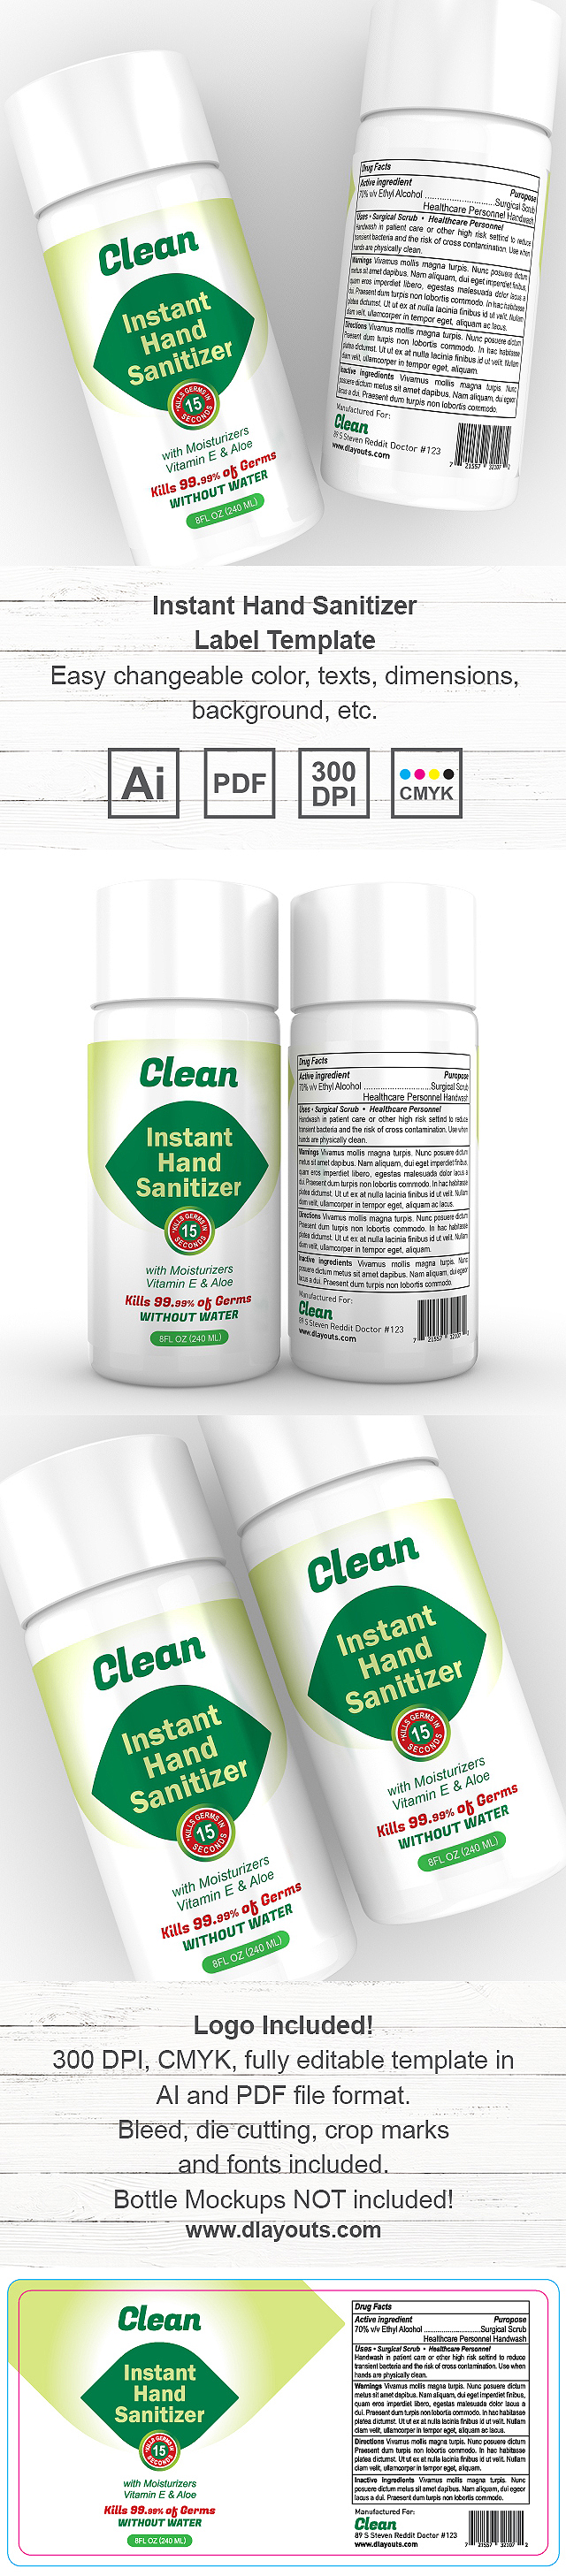 Instant Hand Sanitizer Label Template